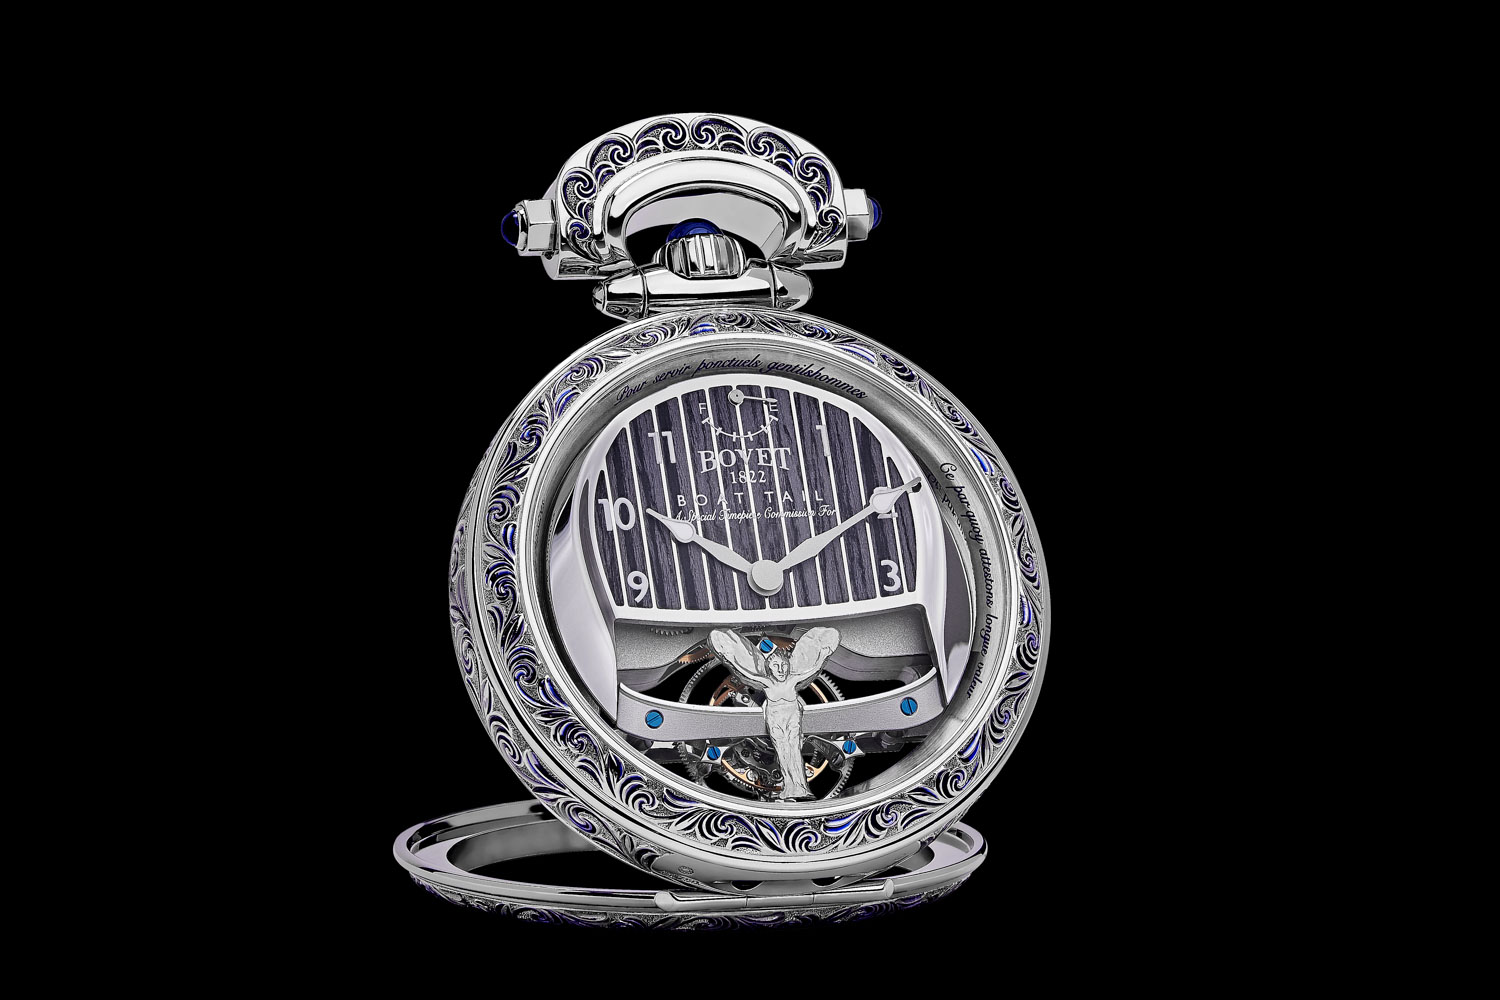 Rolls-Royce Boat Tail Bovet Lady's Timepiece